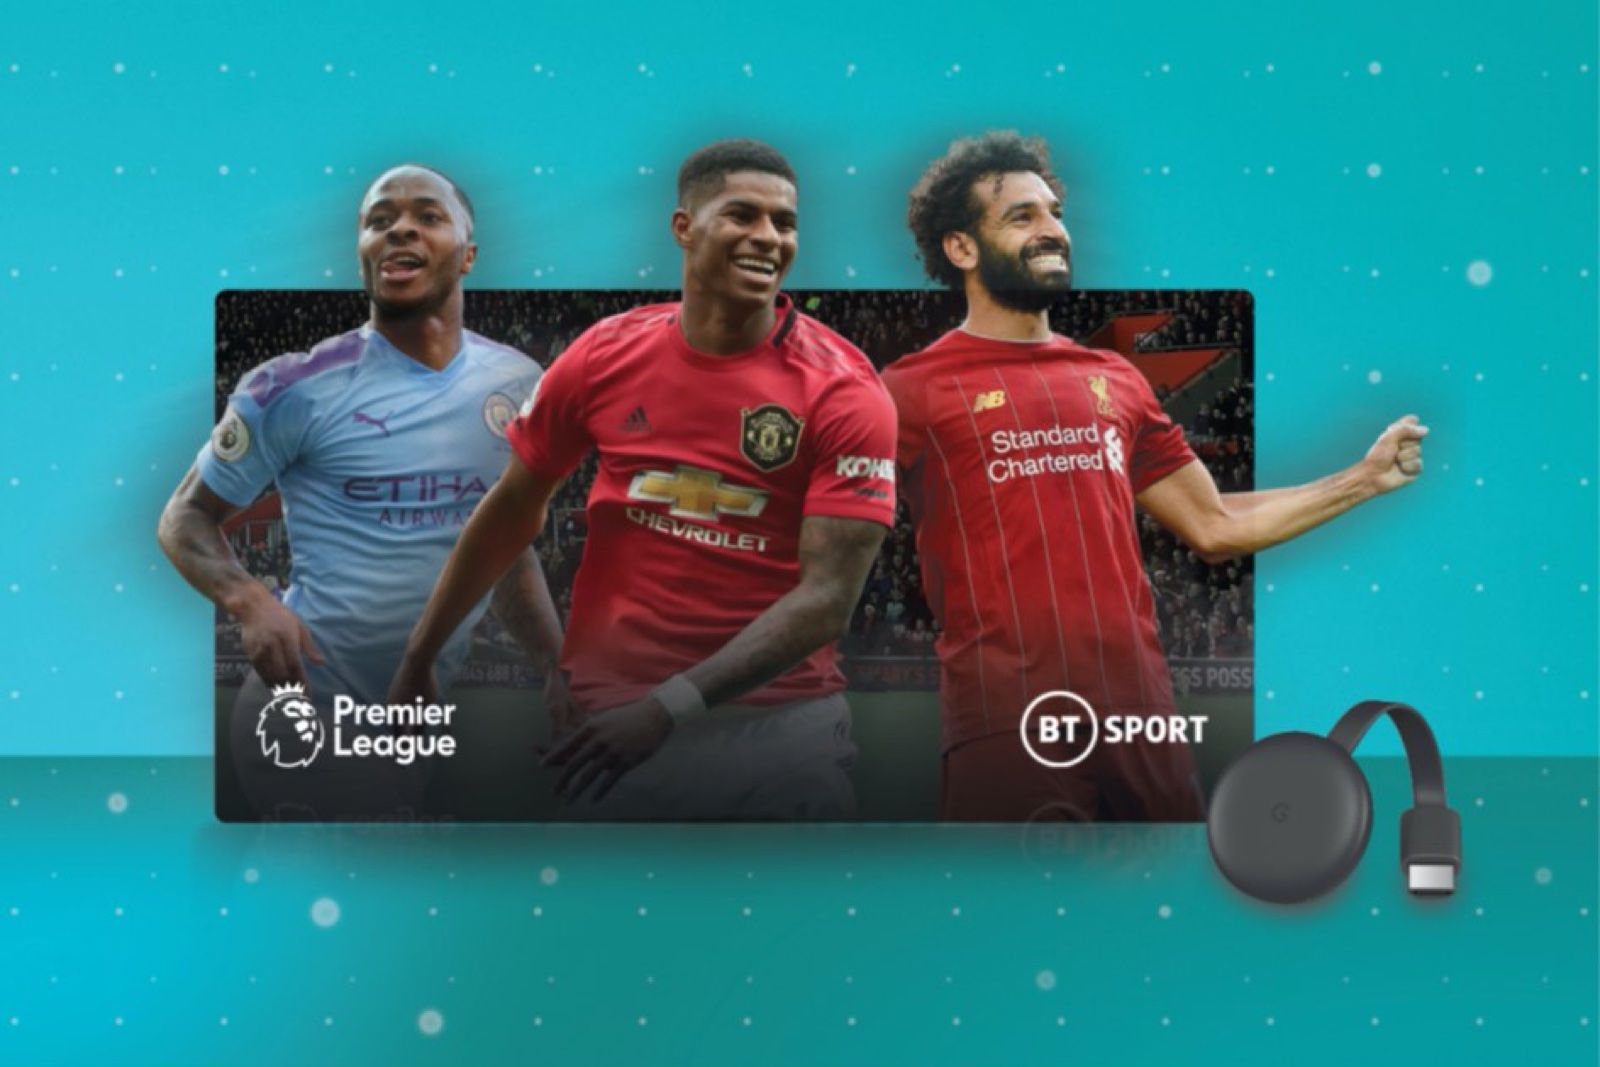 EE is offering 'BT Sport in a Box' including a Google Chromecast photo 1